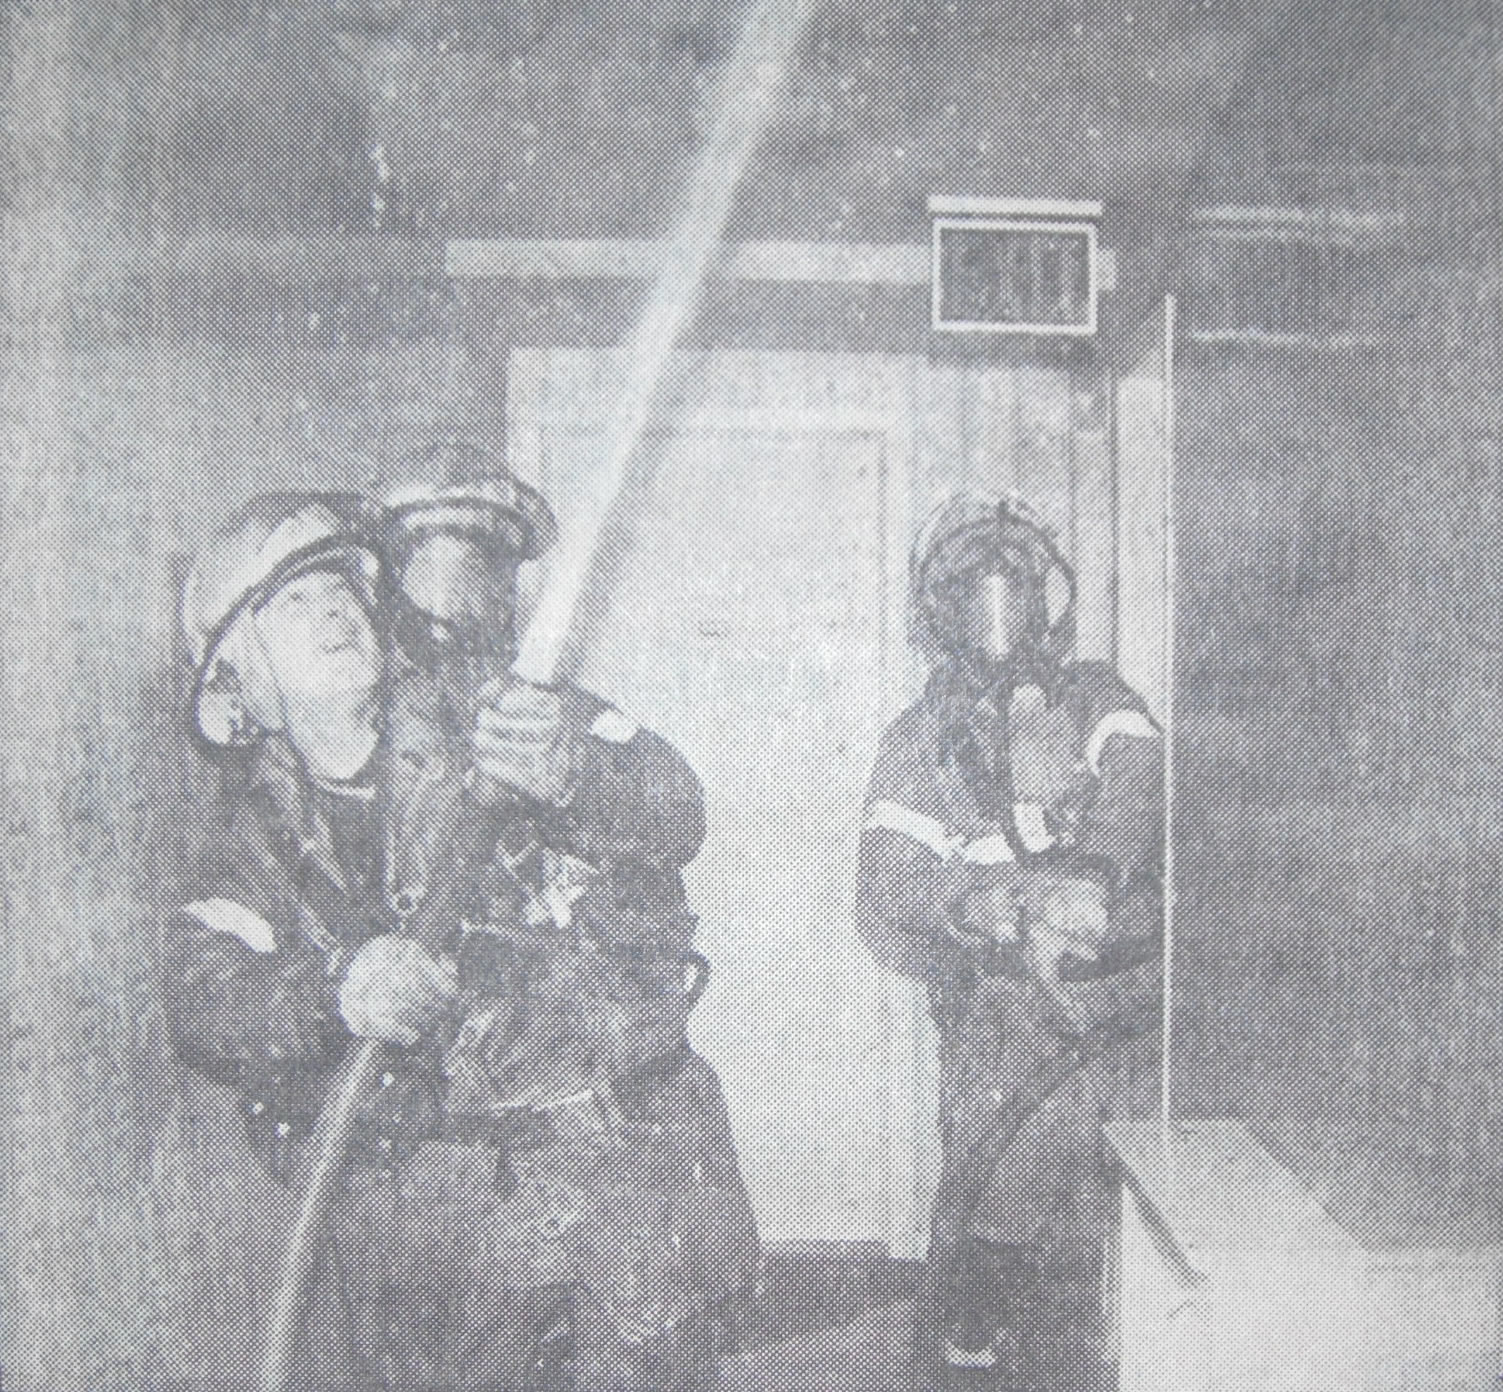 Fire fighters spraying water during an interior fire overhauling operation.